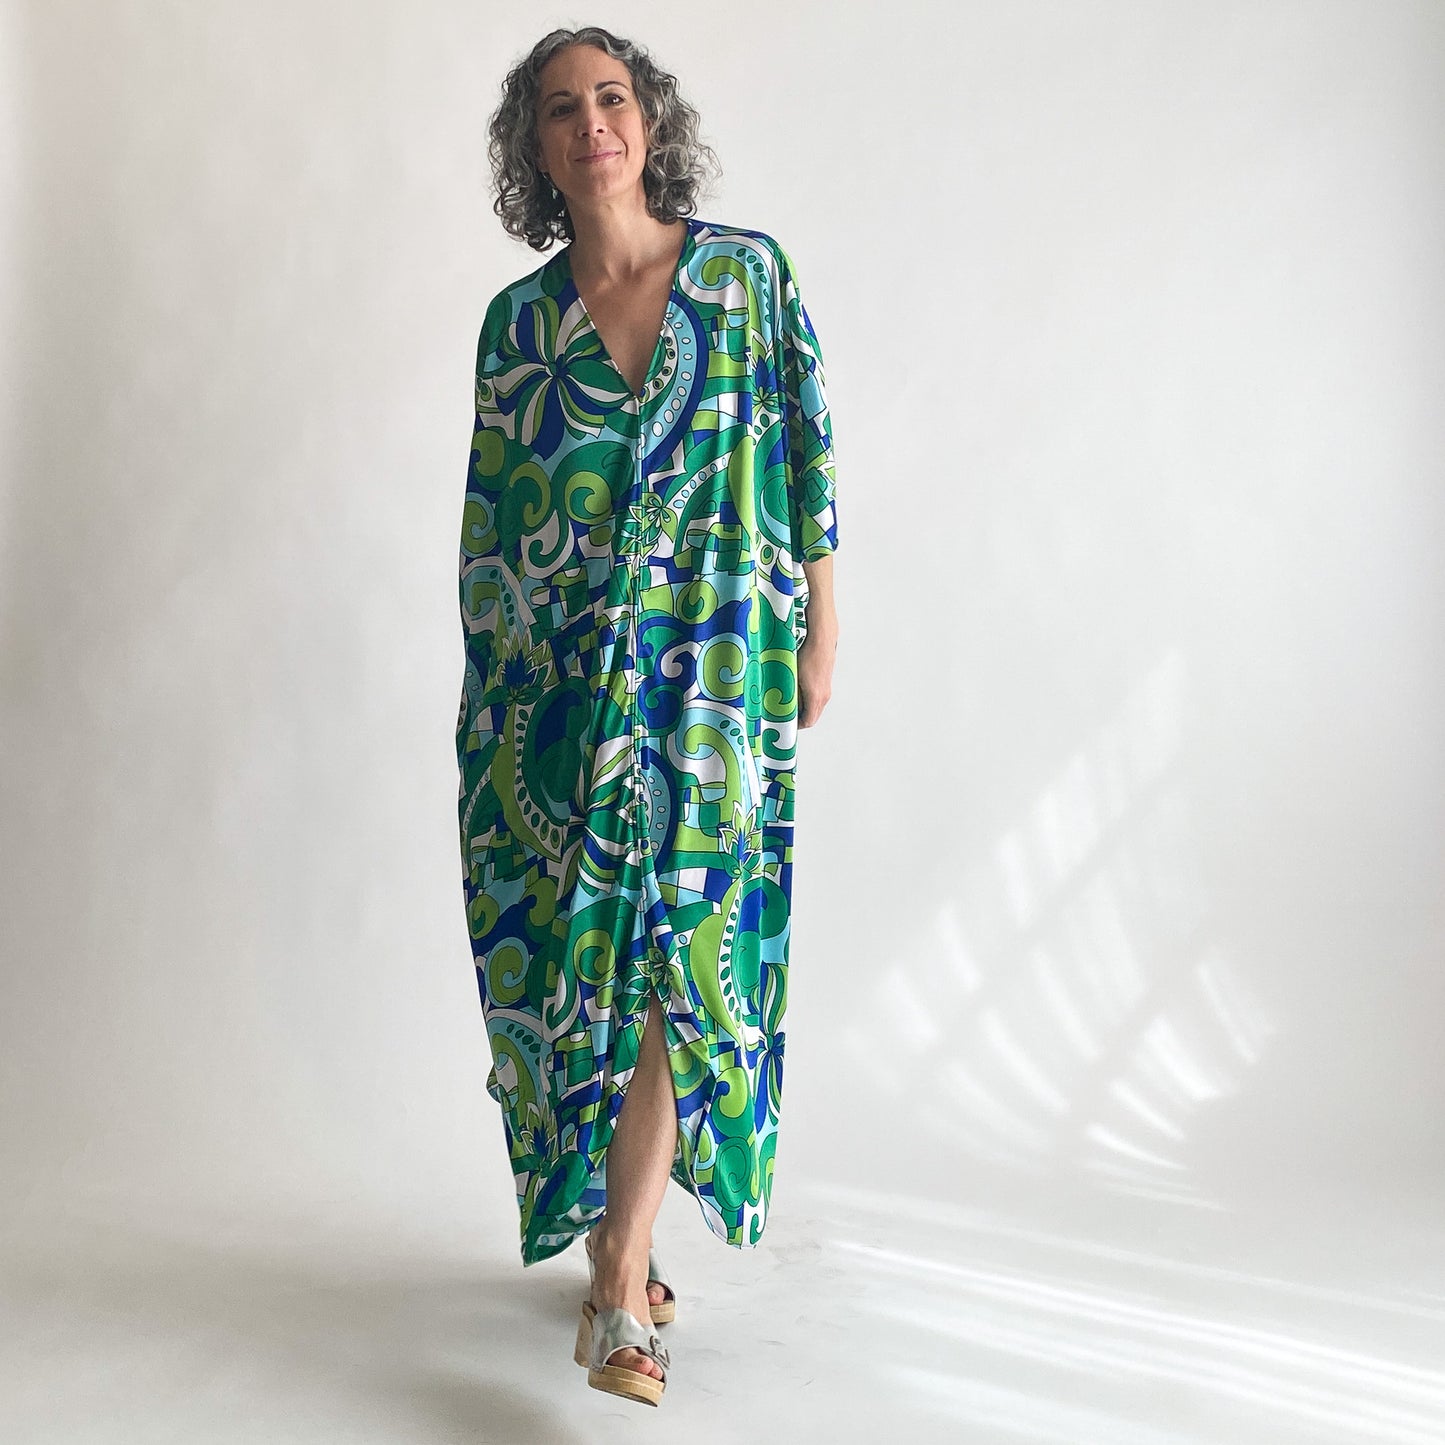 House of Lu Diana Caftan in Color Number 46. A vintage psychedelic blue and green print made of vintage acetate fabric. Perfectly draped and perfectly packable. Only five available. 